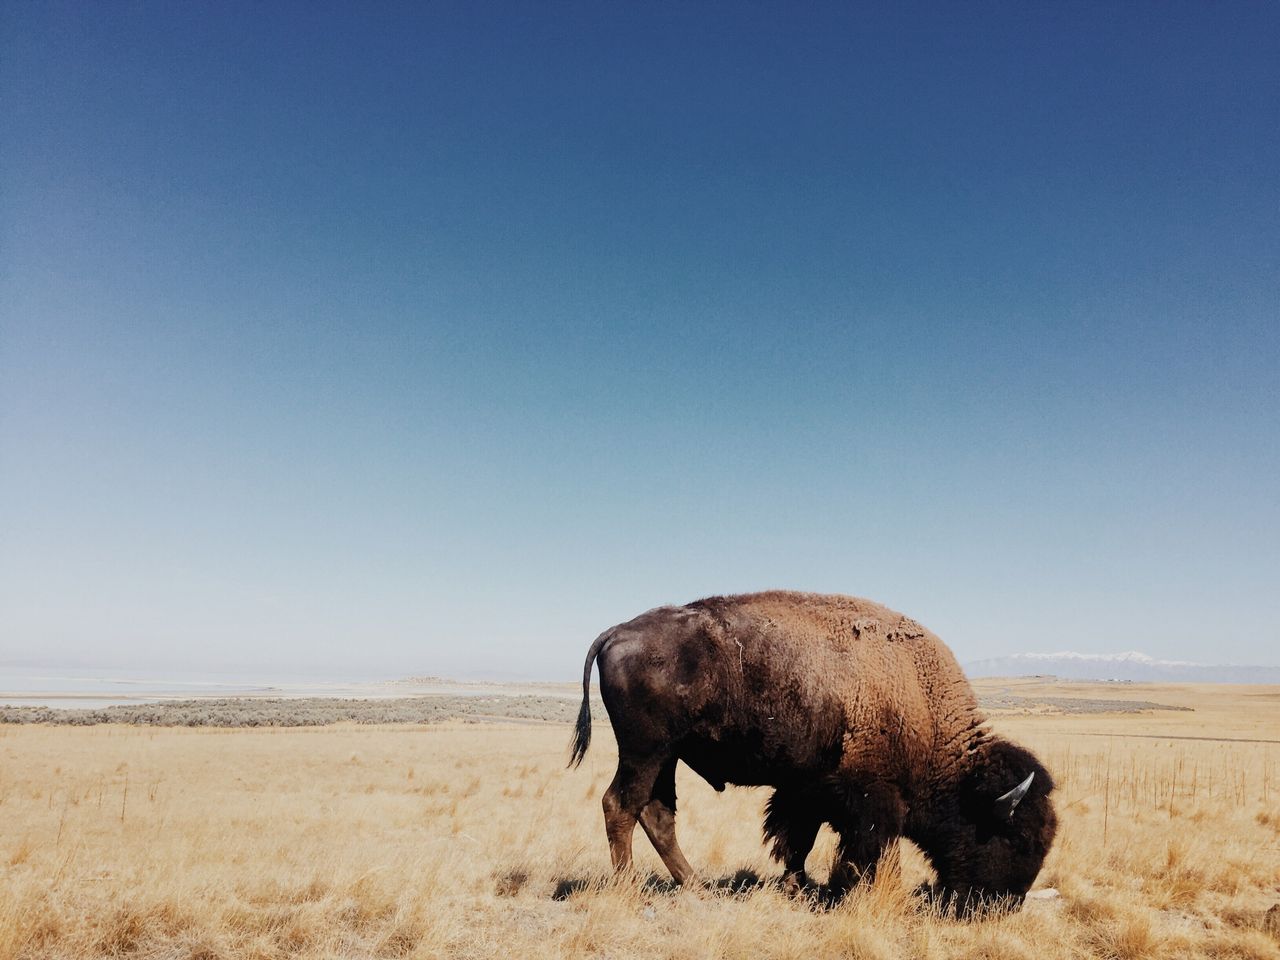 Davis Bell. Los Angeles CA, United States. <strong>2nd Place – </strong><strong>The America I Know.<br></strong><br><em>“As we made our way around Antelope Island on that clear and crisp September day I couldn’t help but be startled and amazed at the immenseness of these bison. Out here on the open field as they moved about the dry golden grass above the Salt Lake, slowly, deliberately, the feeling of quiet strength was humbling to me, the observer. In many ways this image encapsulated my internal search on this particular road trip. Being but an arms length away from this gargantuan creature gave me some pause for reflection in my search for so many answers. Here this animal that became the imagery of The West, and whose lore is interwoven with pioneers, cowboys, and the earliest inhabitants of these American plains, stands as a mythical remnant, a symbol, of our American journey and what is possible with a little foresight, a little courage, and a lot of dedication.”</em><strong><br></strong>